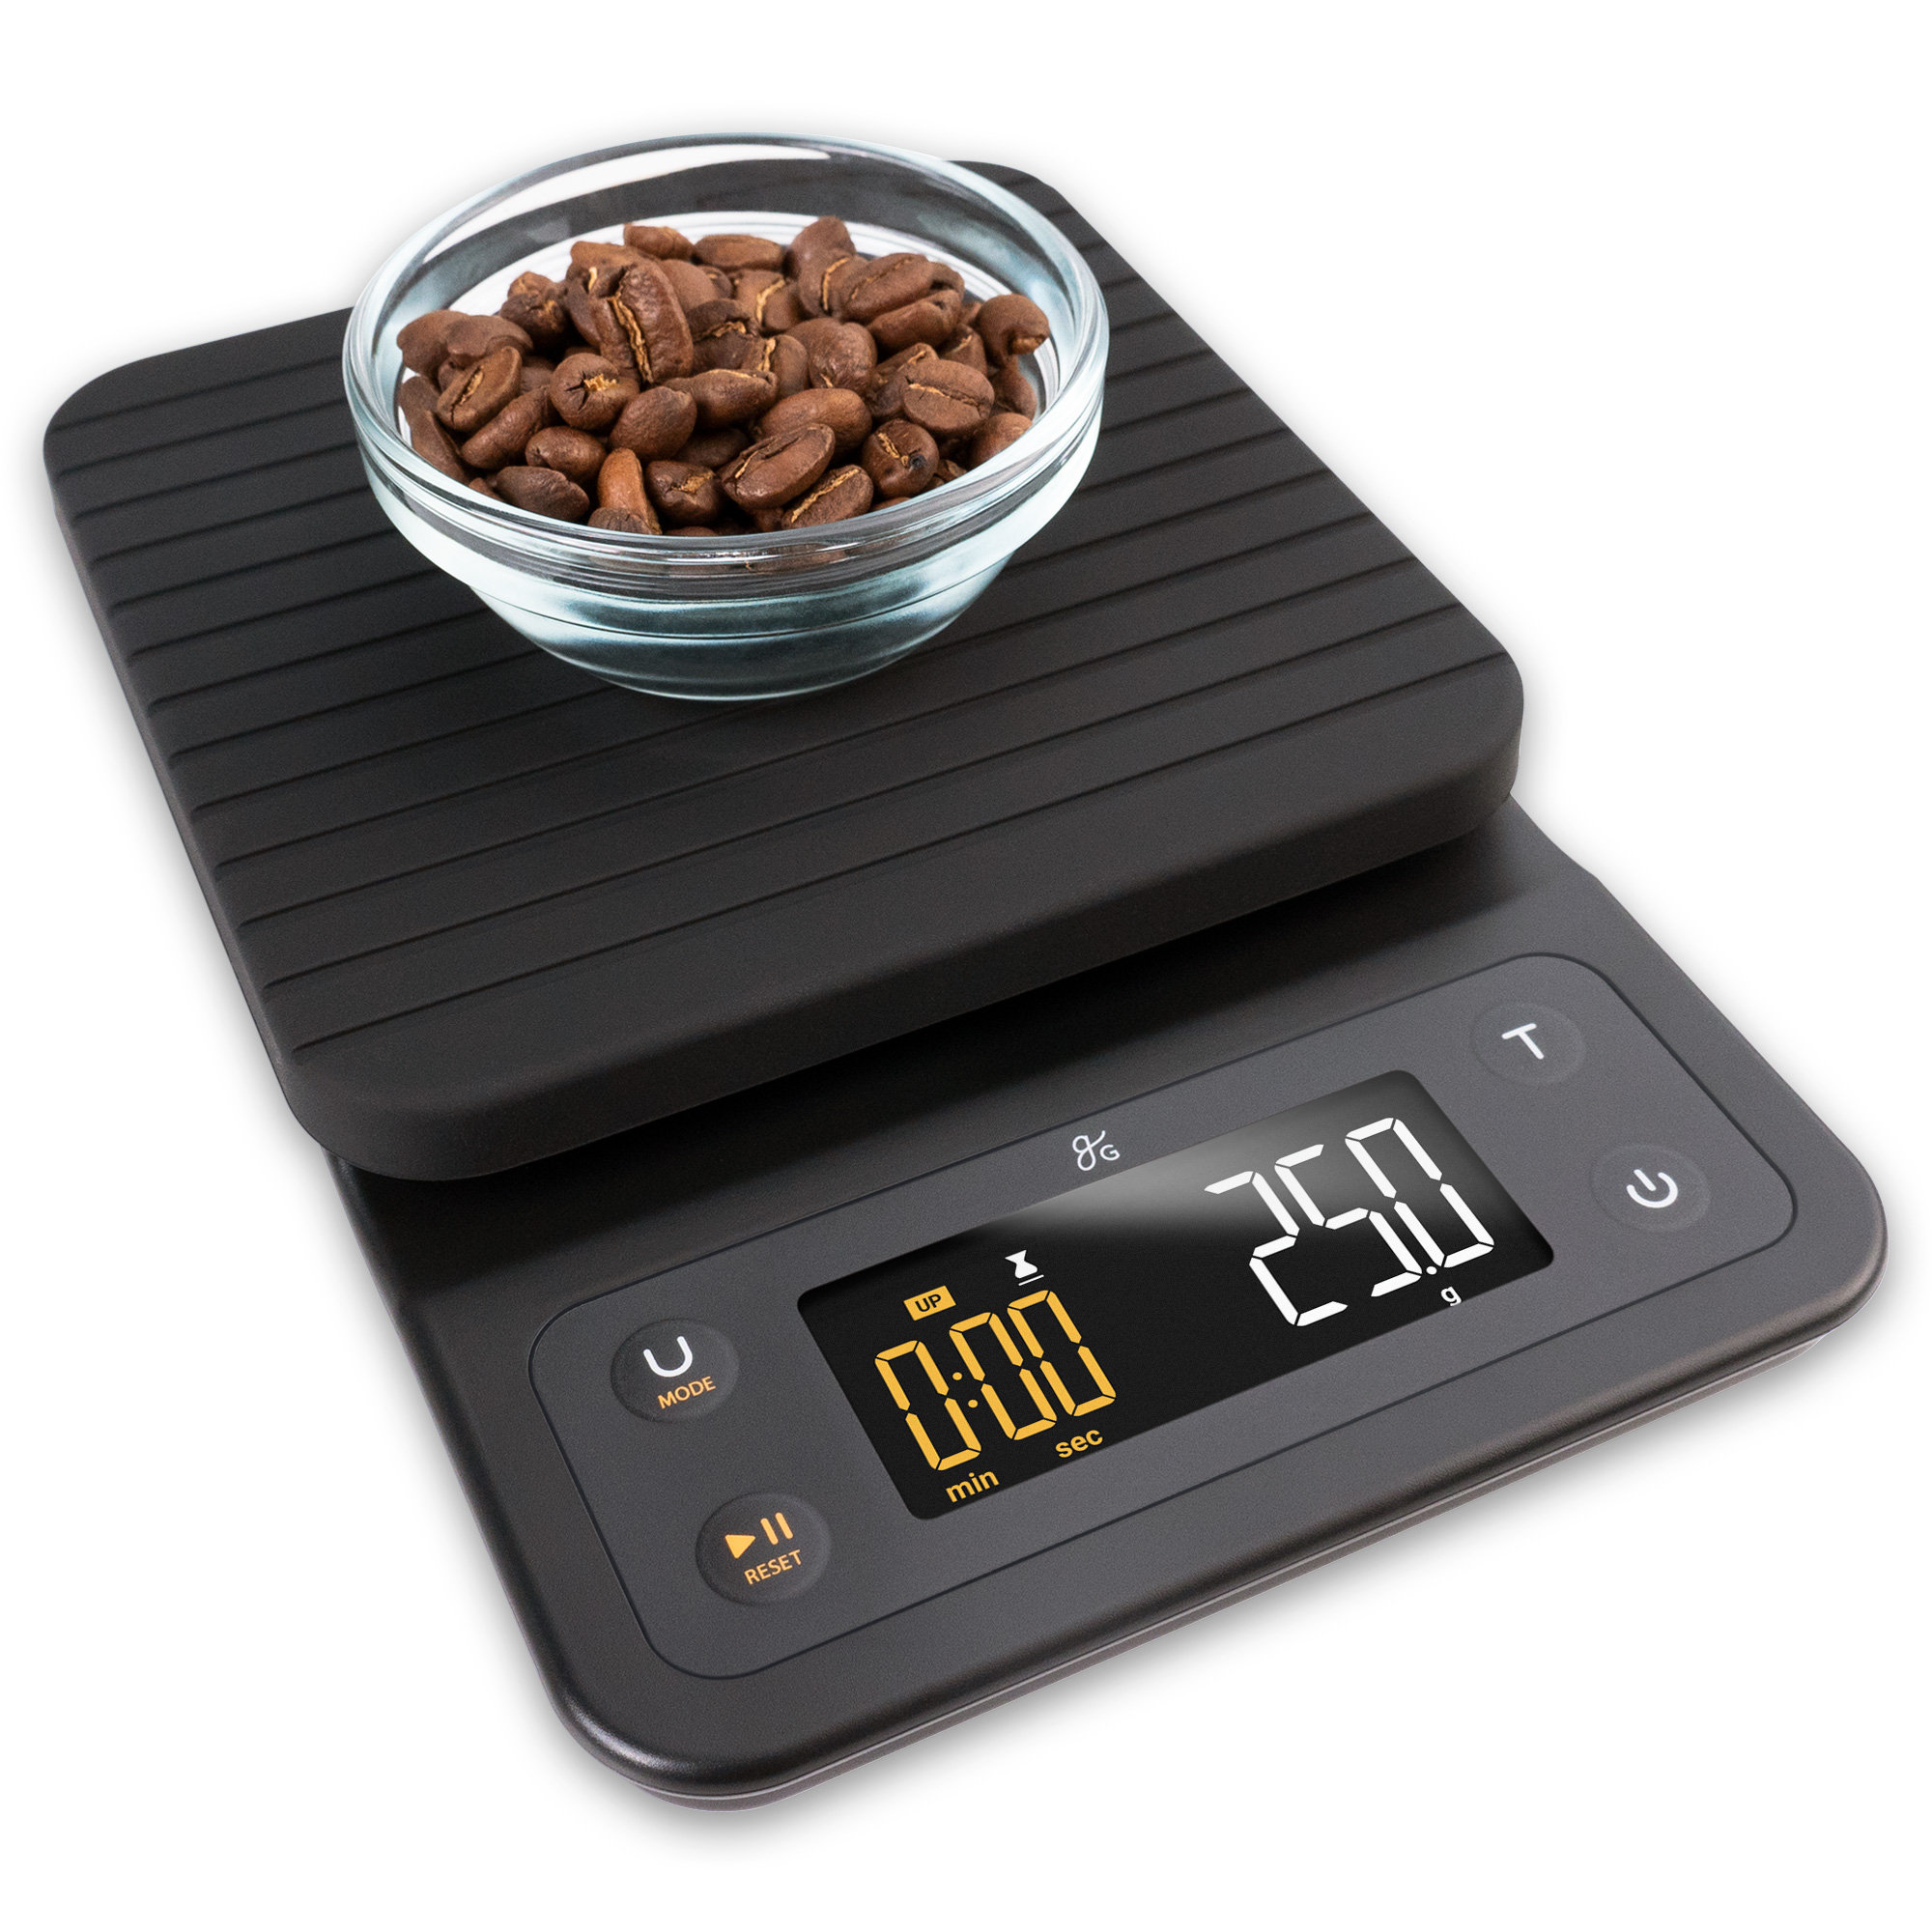 How to Use GreaterGoods Digital Food Kitchen Scale? 